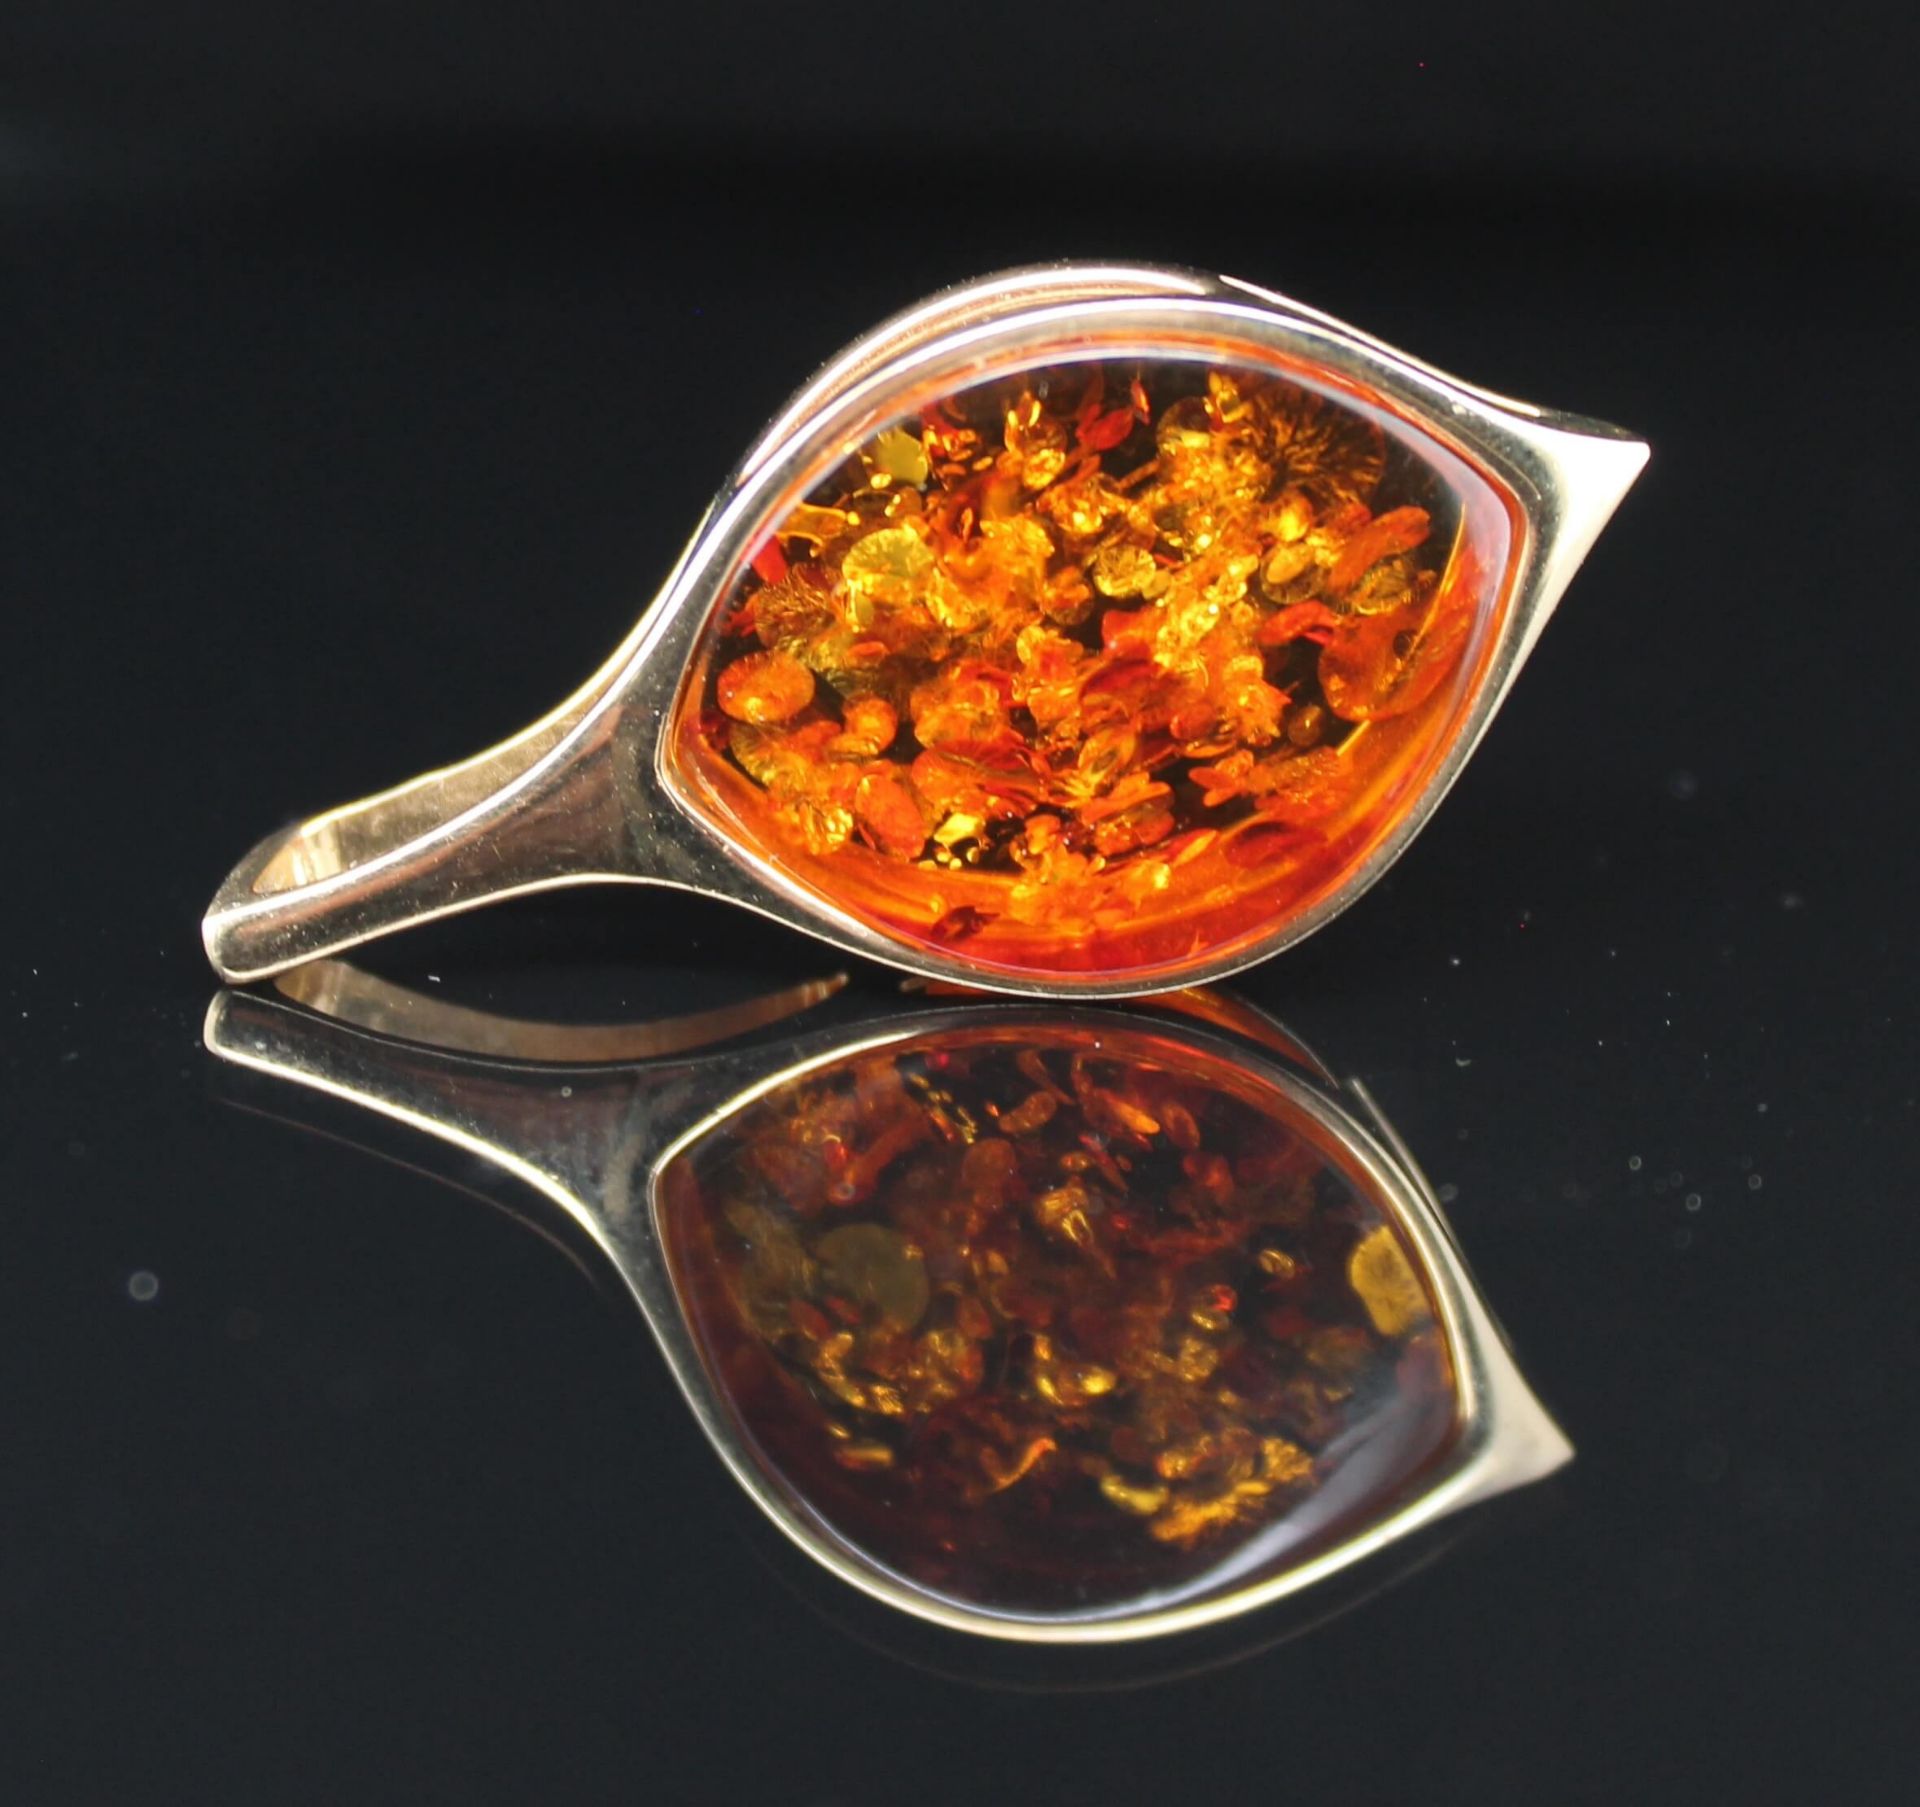 Pendant with an amber